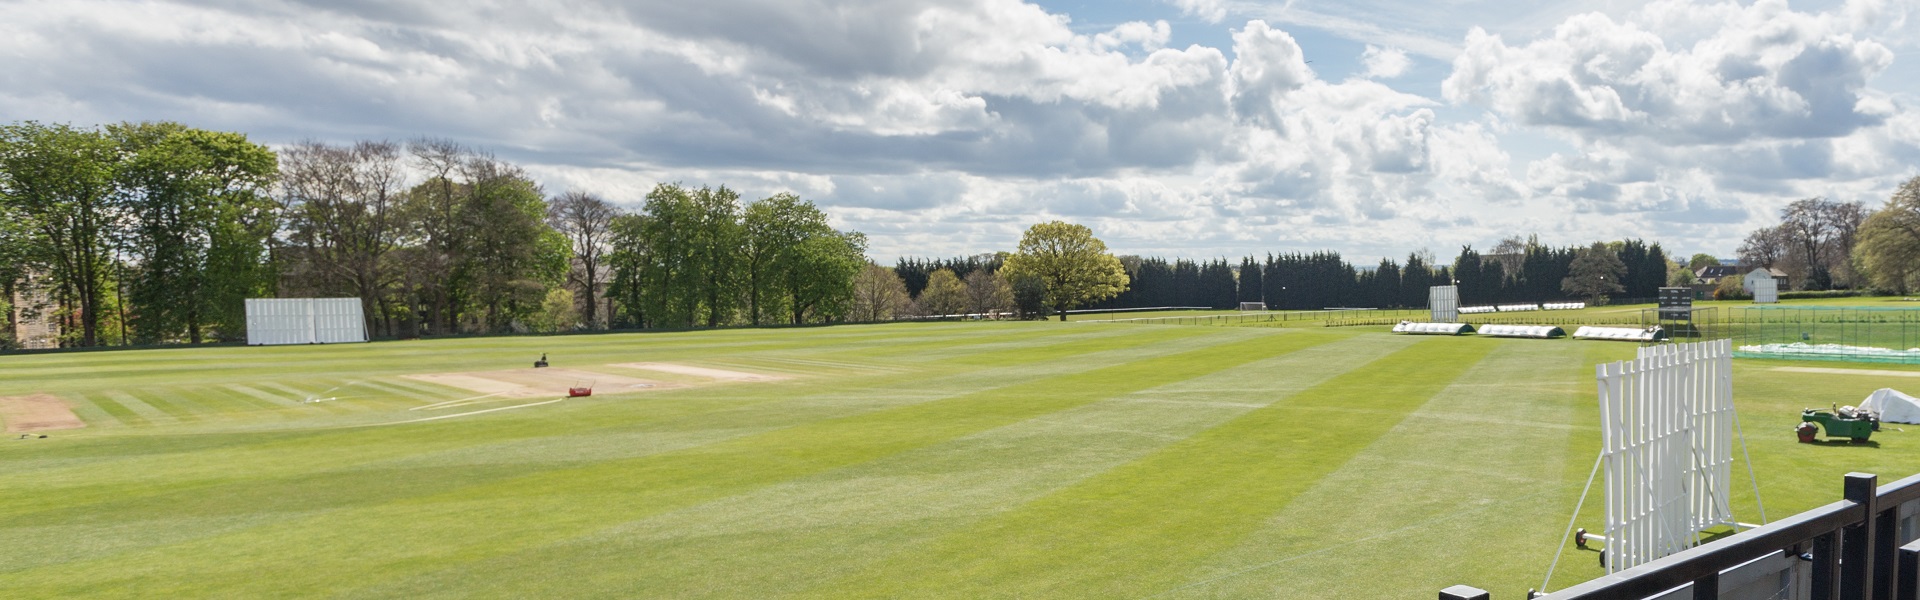 Sports Park Weetwood Cricket